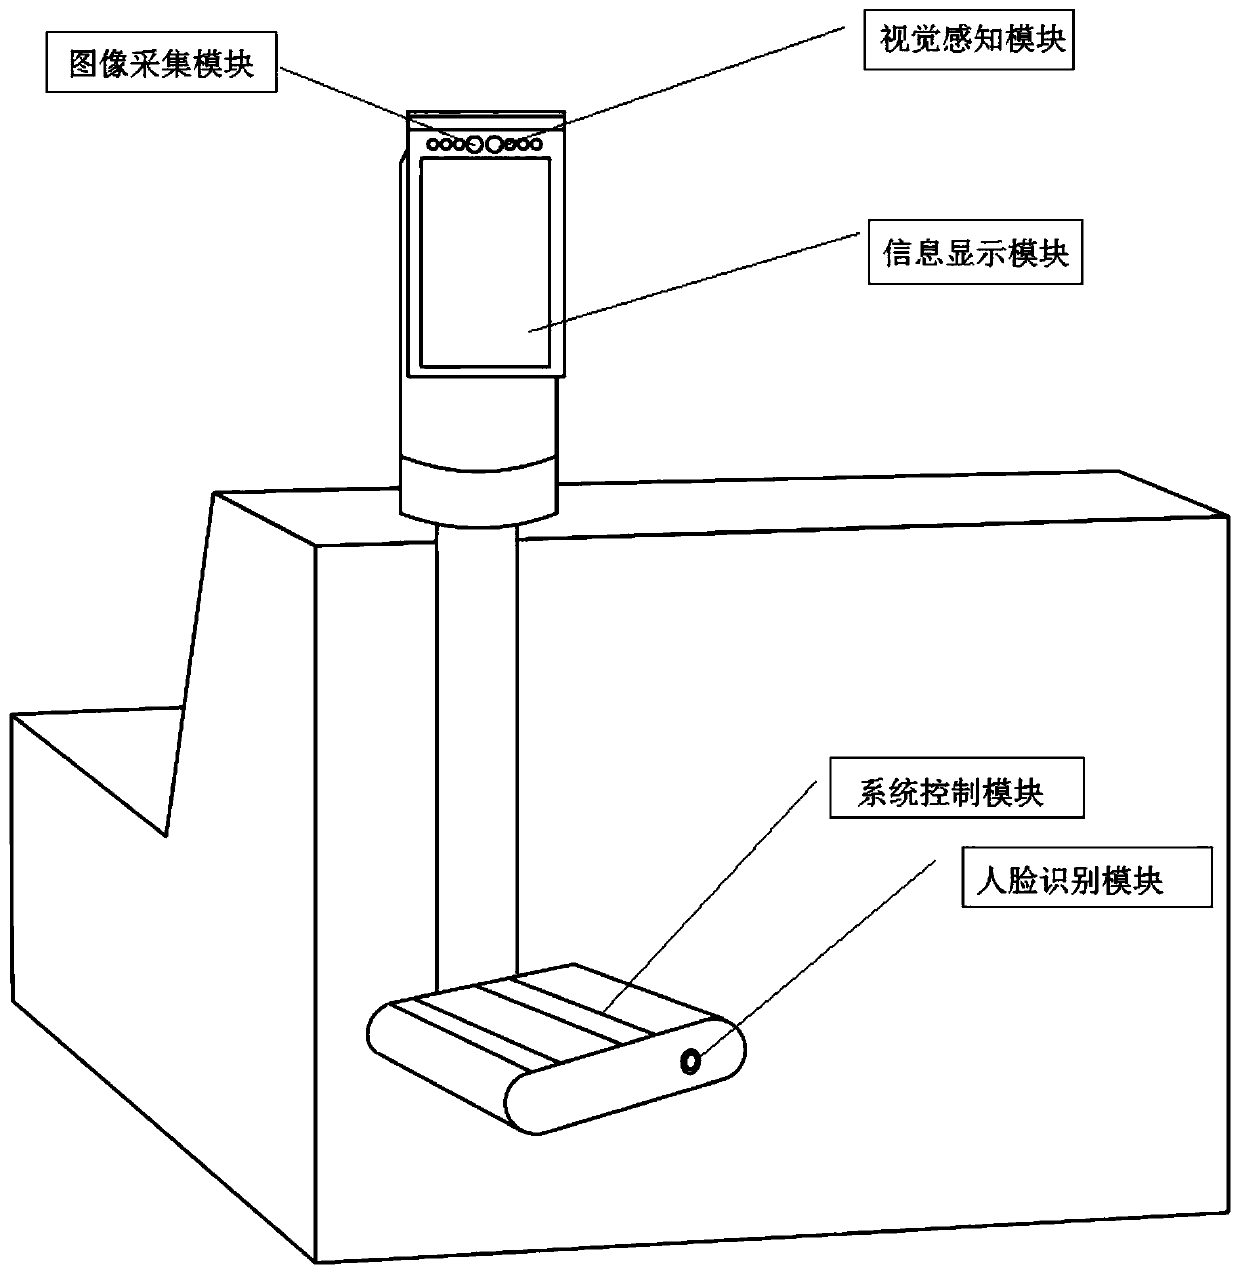 Human face departure information equipment based on visual perception